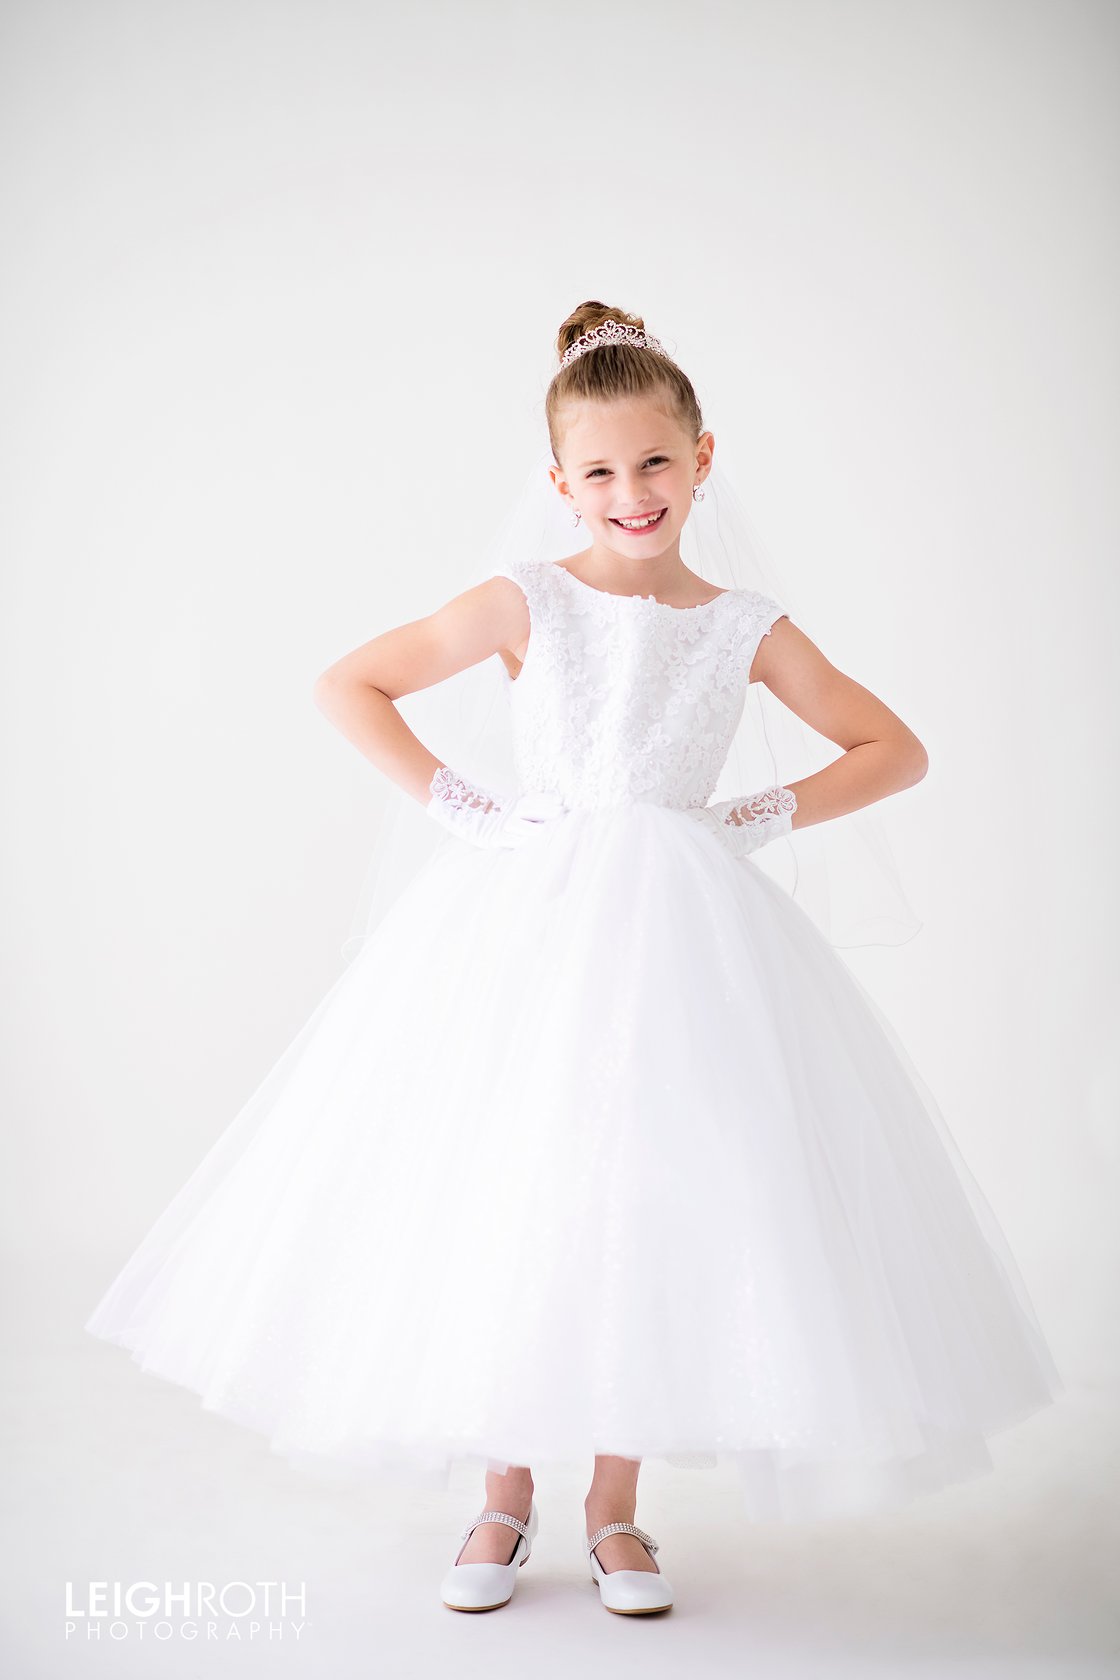 Image of First Communion Mini Sessions 